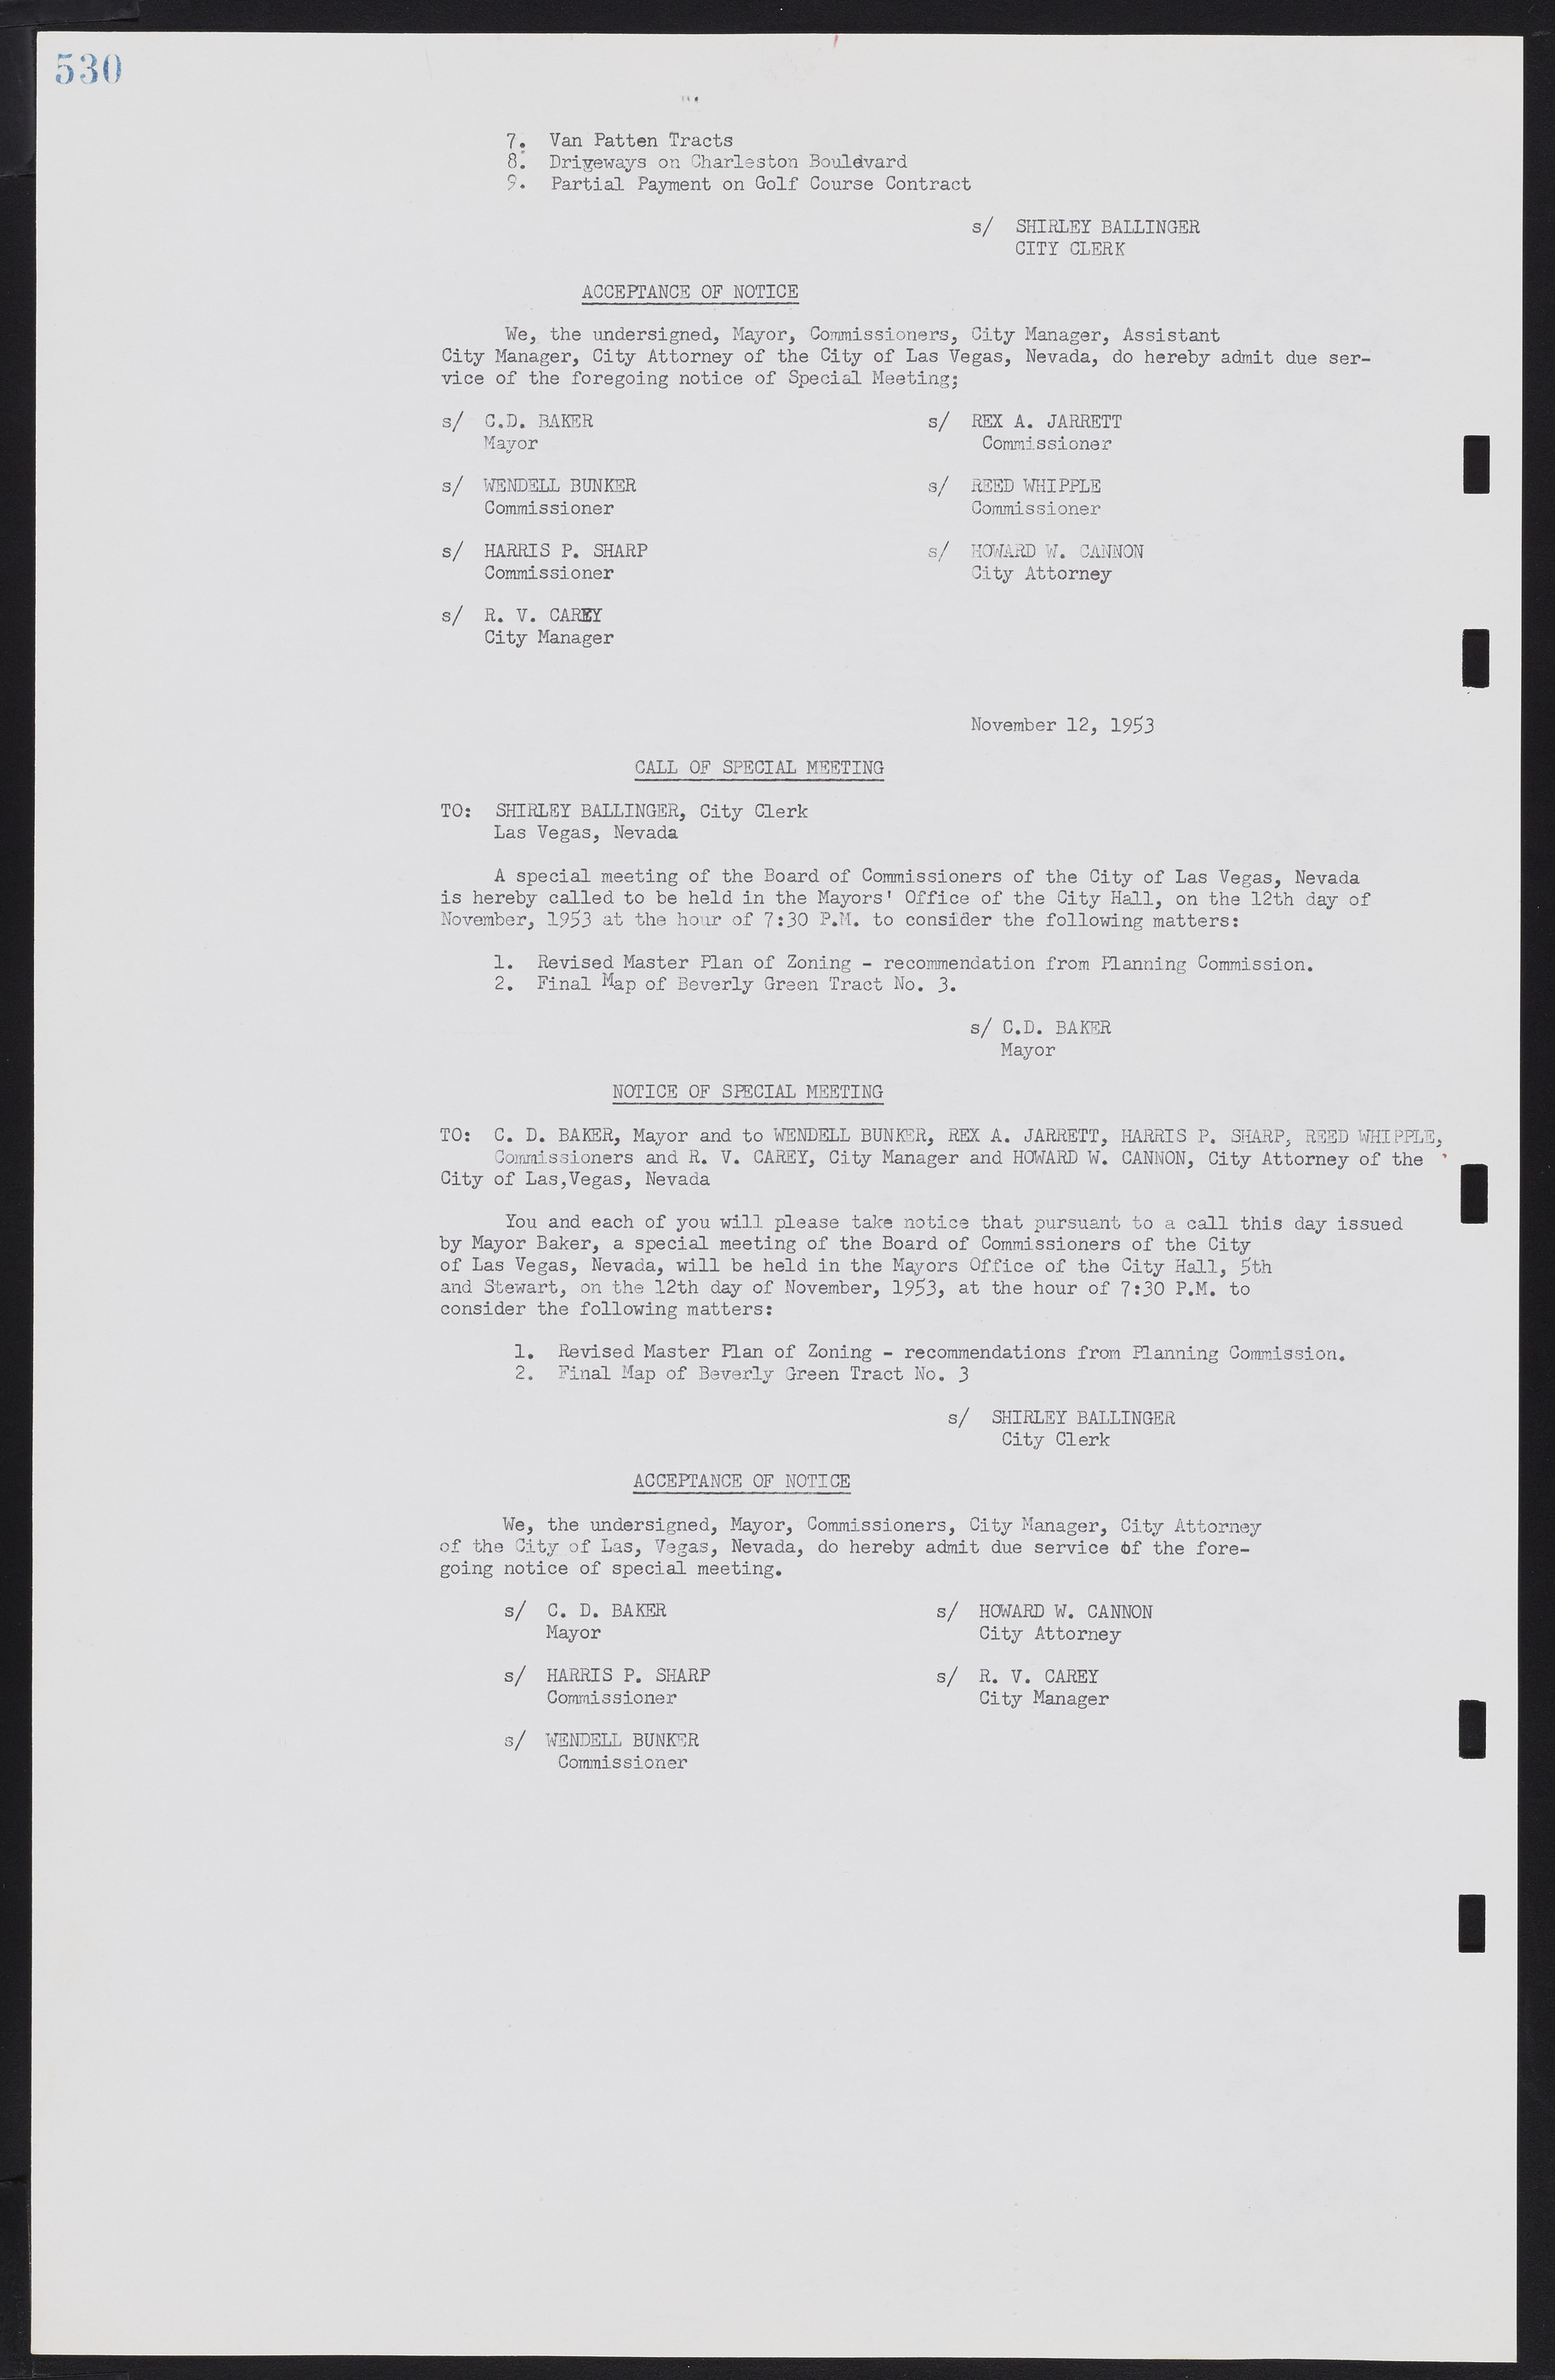 Las Vegas City Commission Minutes, May 26, 1952 to February 17, 1954, lvc000008-560